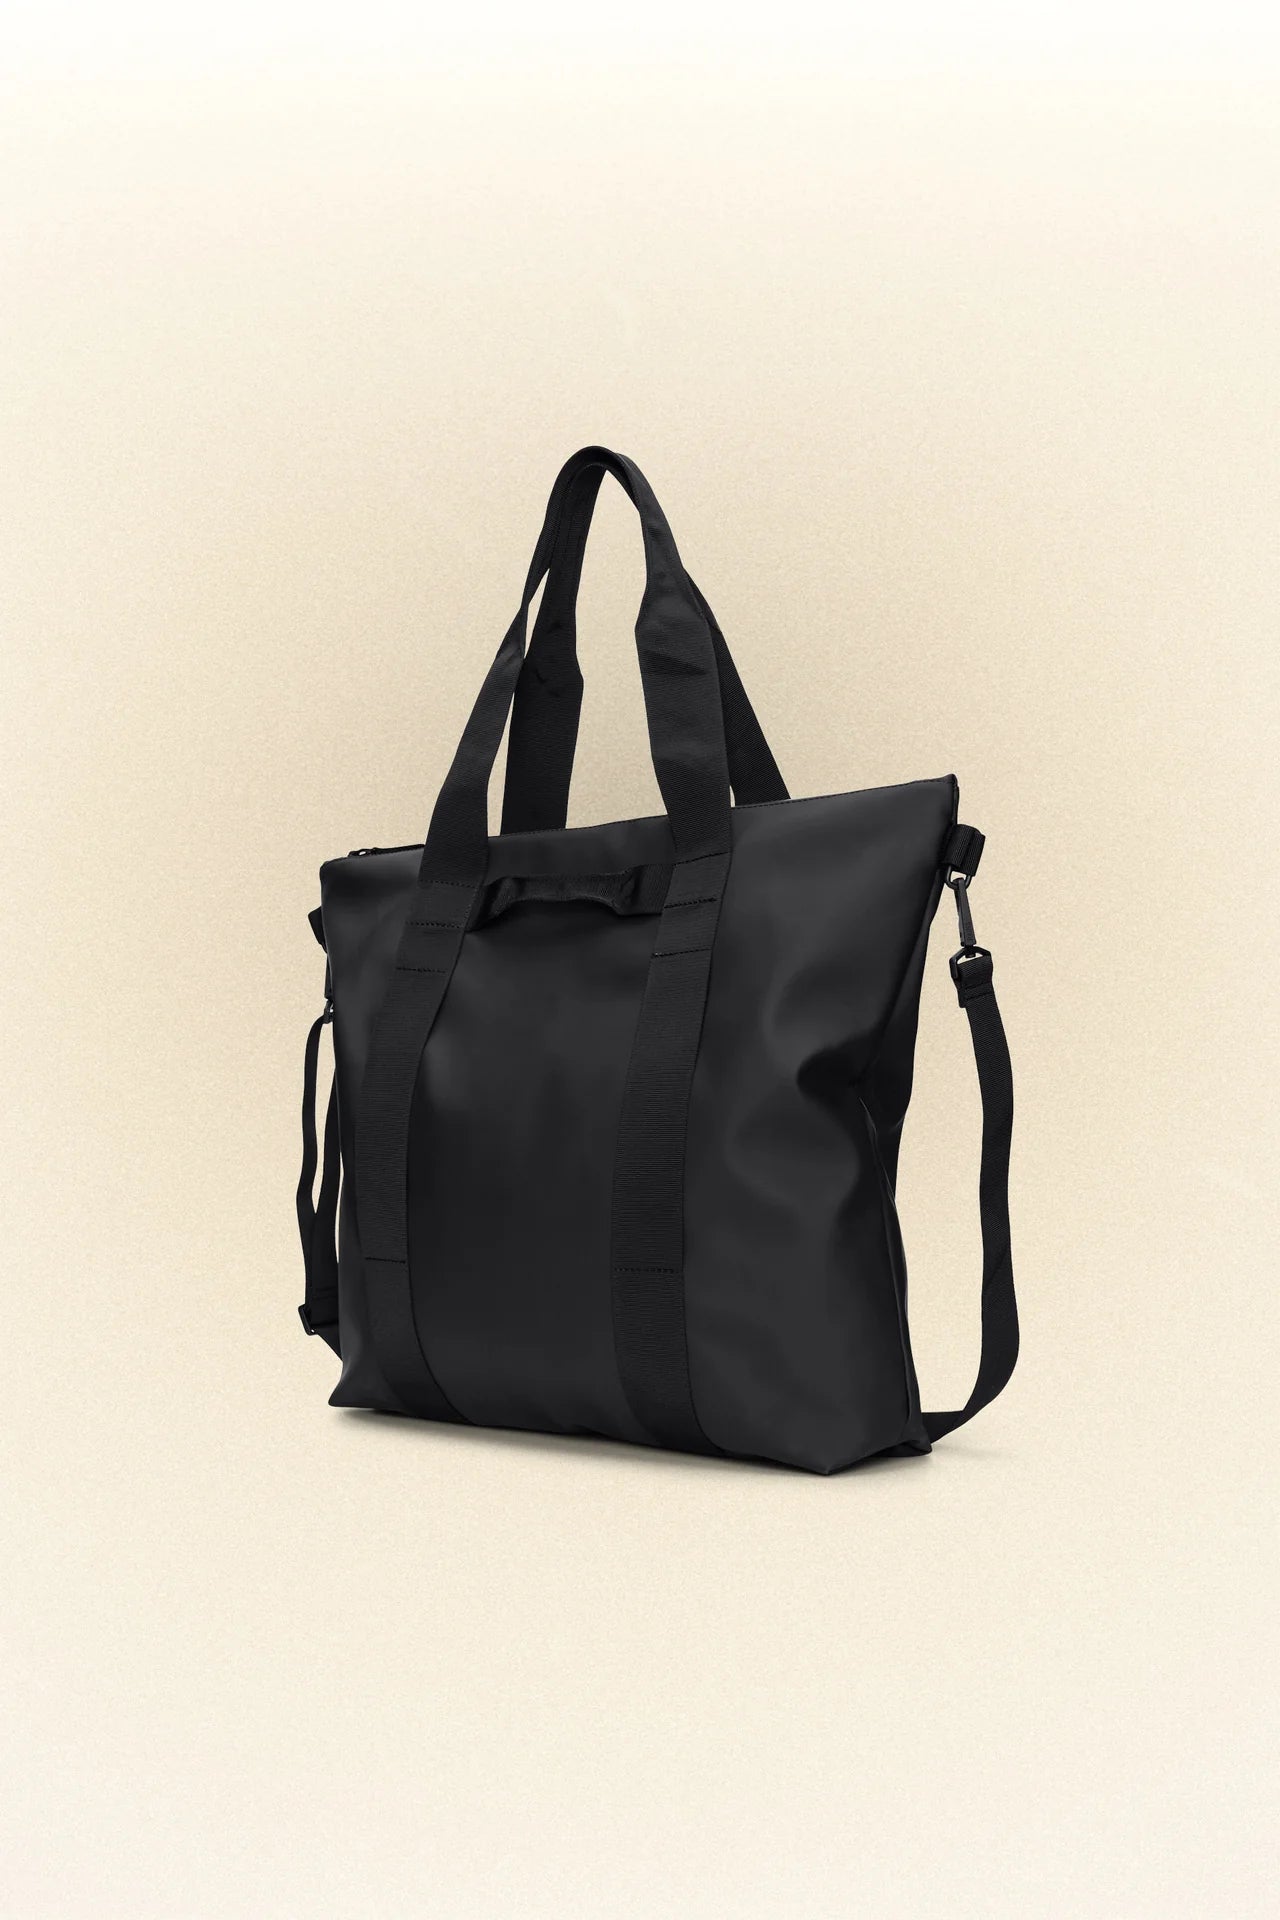 A Rains waterproof Tote Bag - Black on a white background.